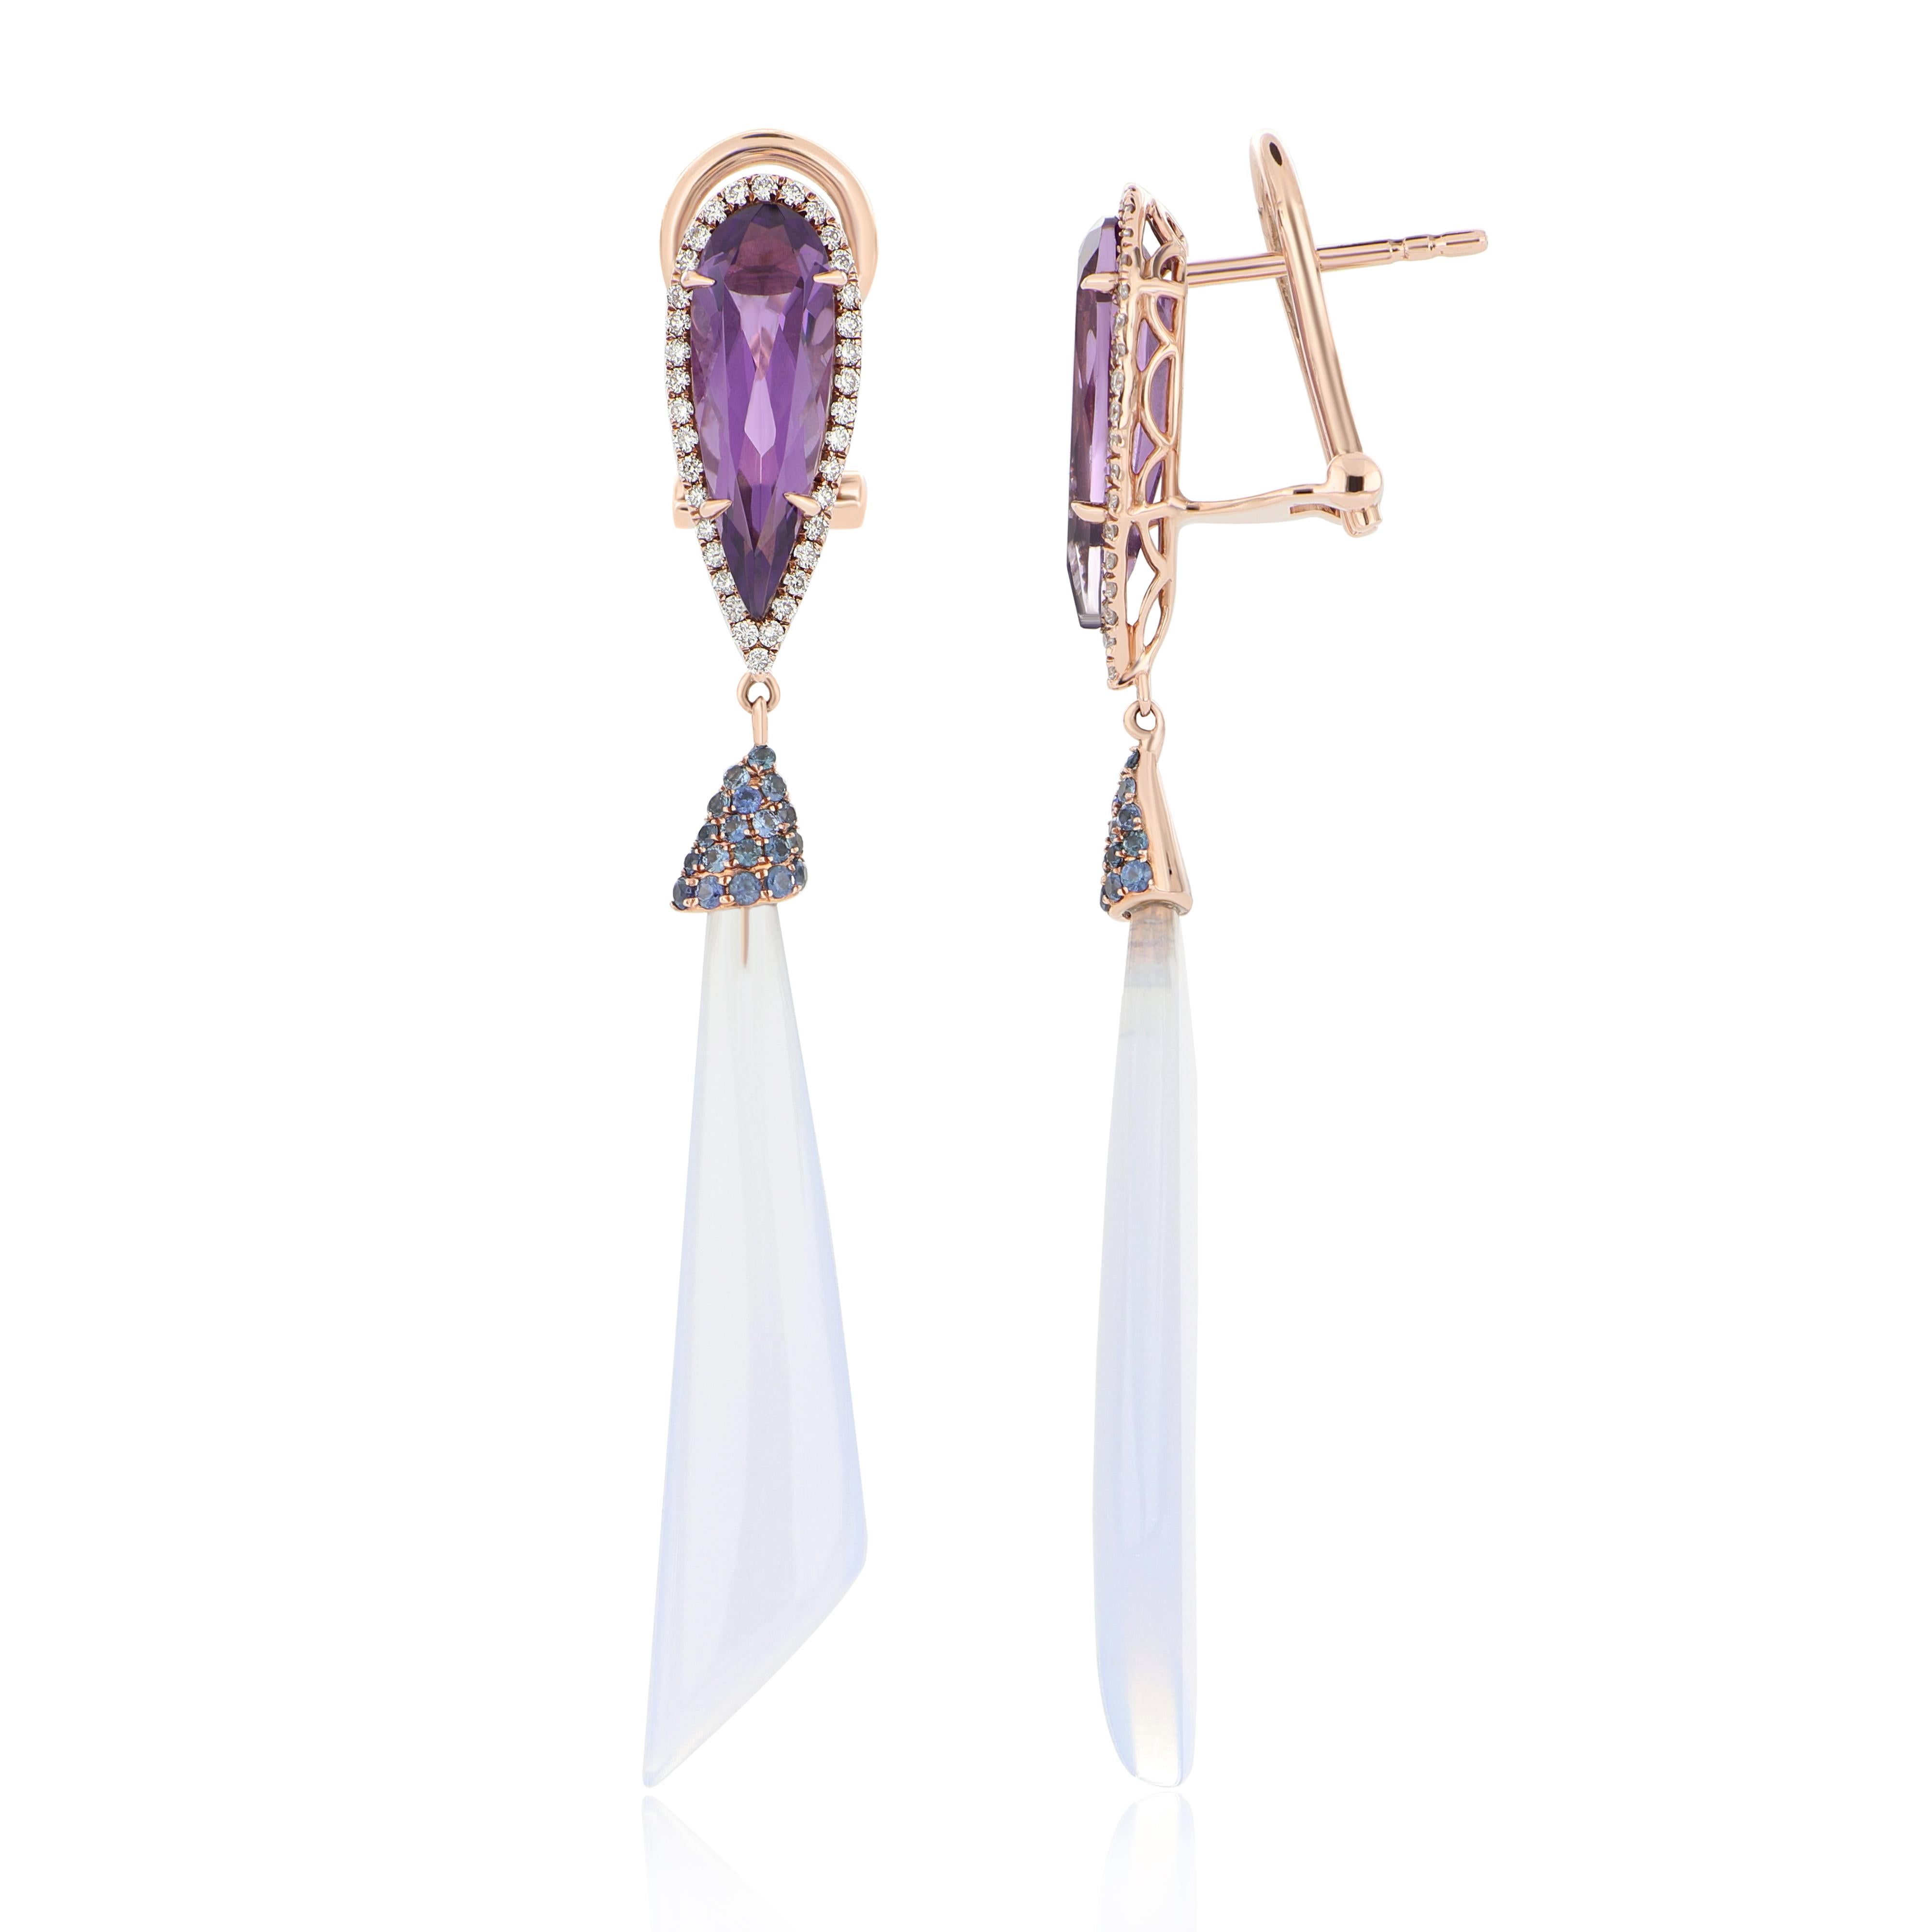 Elegant and exquisitely detailed 14 Karat Rose Gold Mismatched Pair of Earrings, center set with 10.96 Cts .Cab Fancy Shape Blue Chalcedony, and 3.25 Cts of Pear Cut Amethyst accented with Blue Sapphire and micro pave set Diamonds, weighing approx.